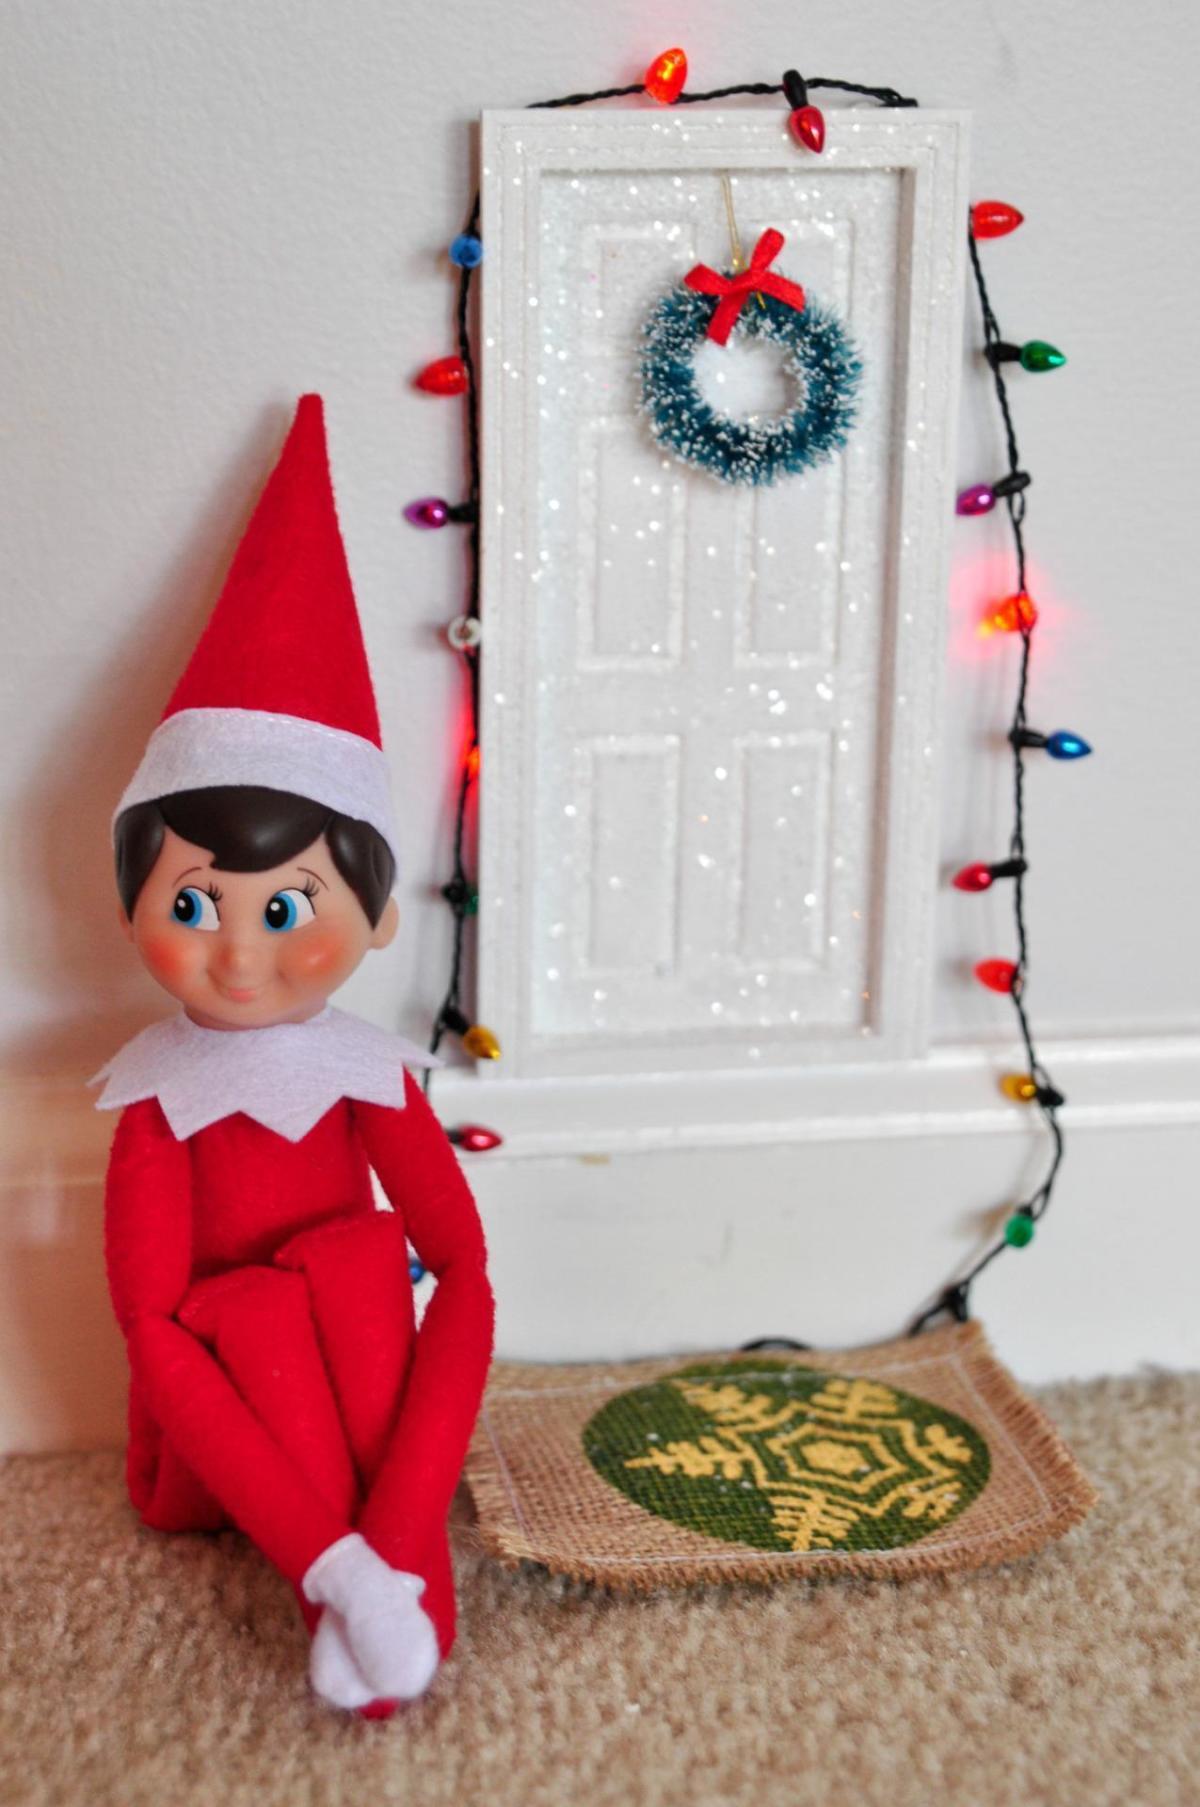 Why I think Elf on the Shelf is creepy - Today's Parent - Today's Parent